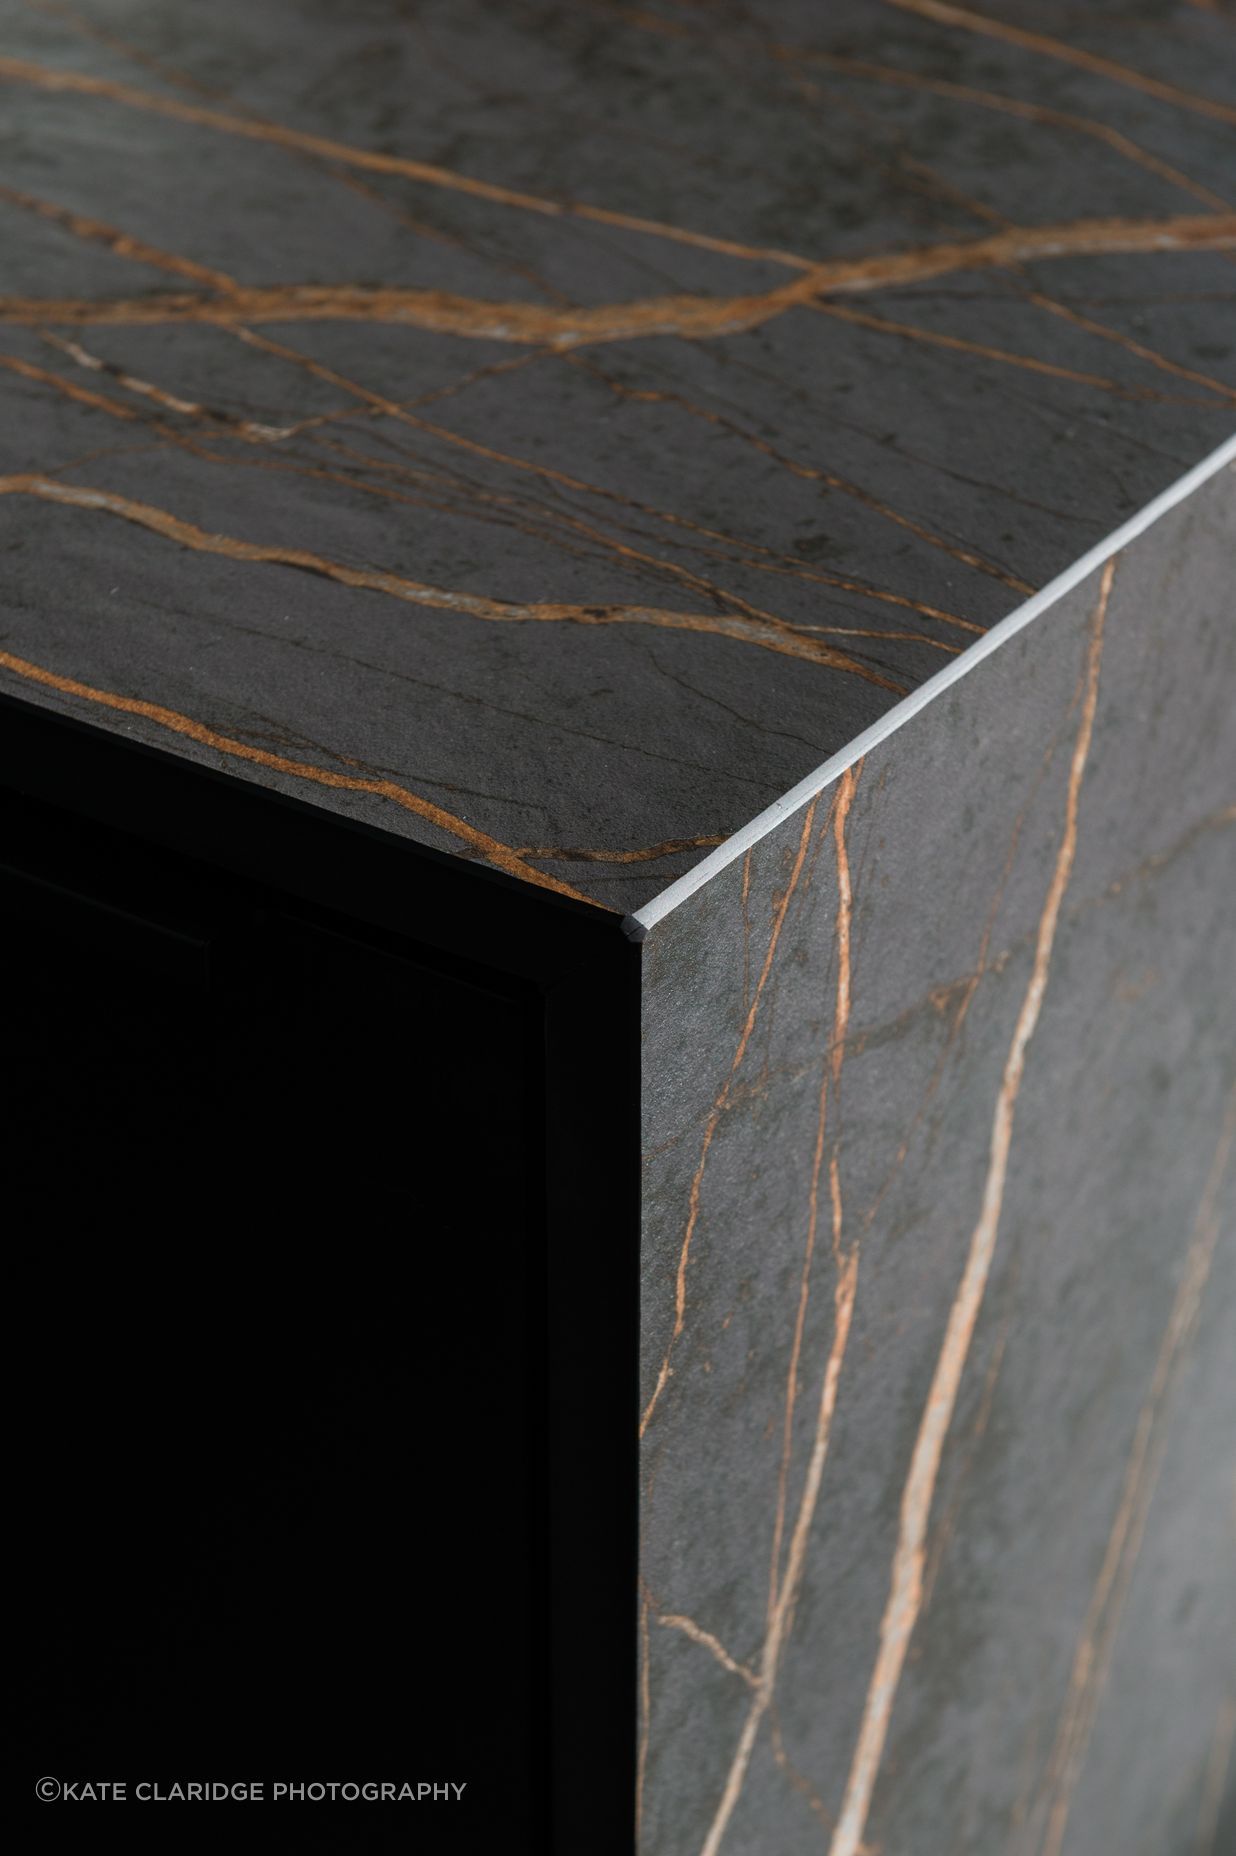 A close-up of the Dekton Laurent benchtop...